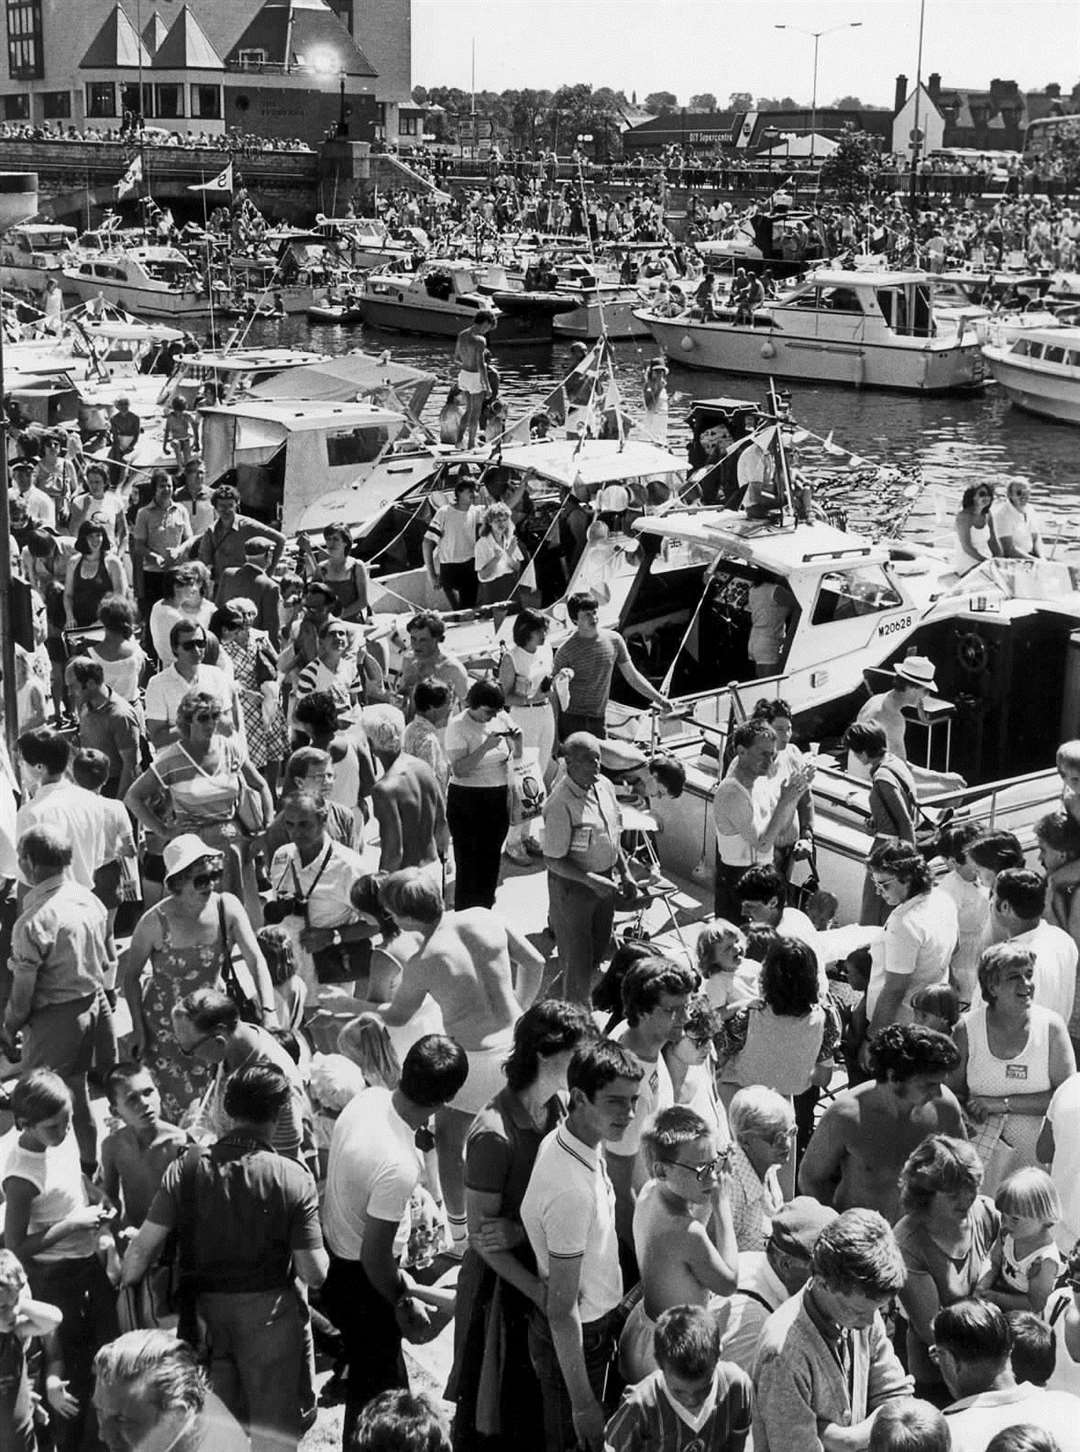 Crowds at Maidstone River Festival in 1985. Can you spot anyone you know?